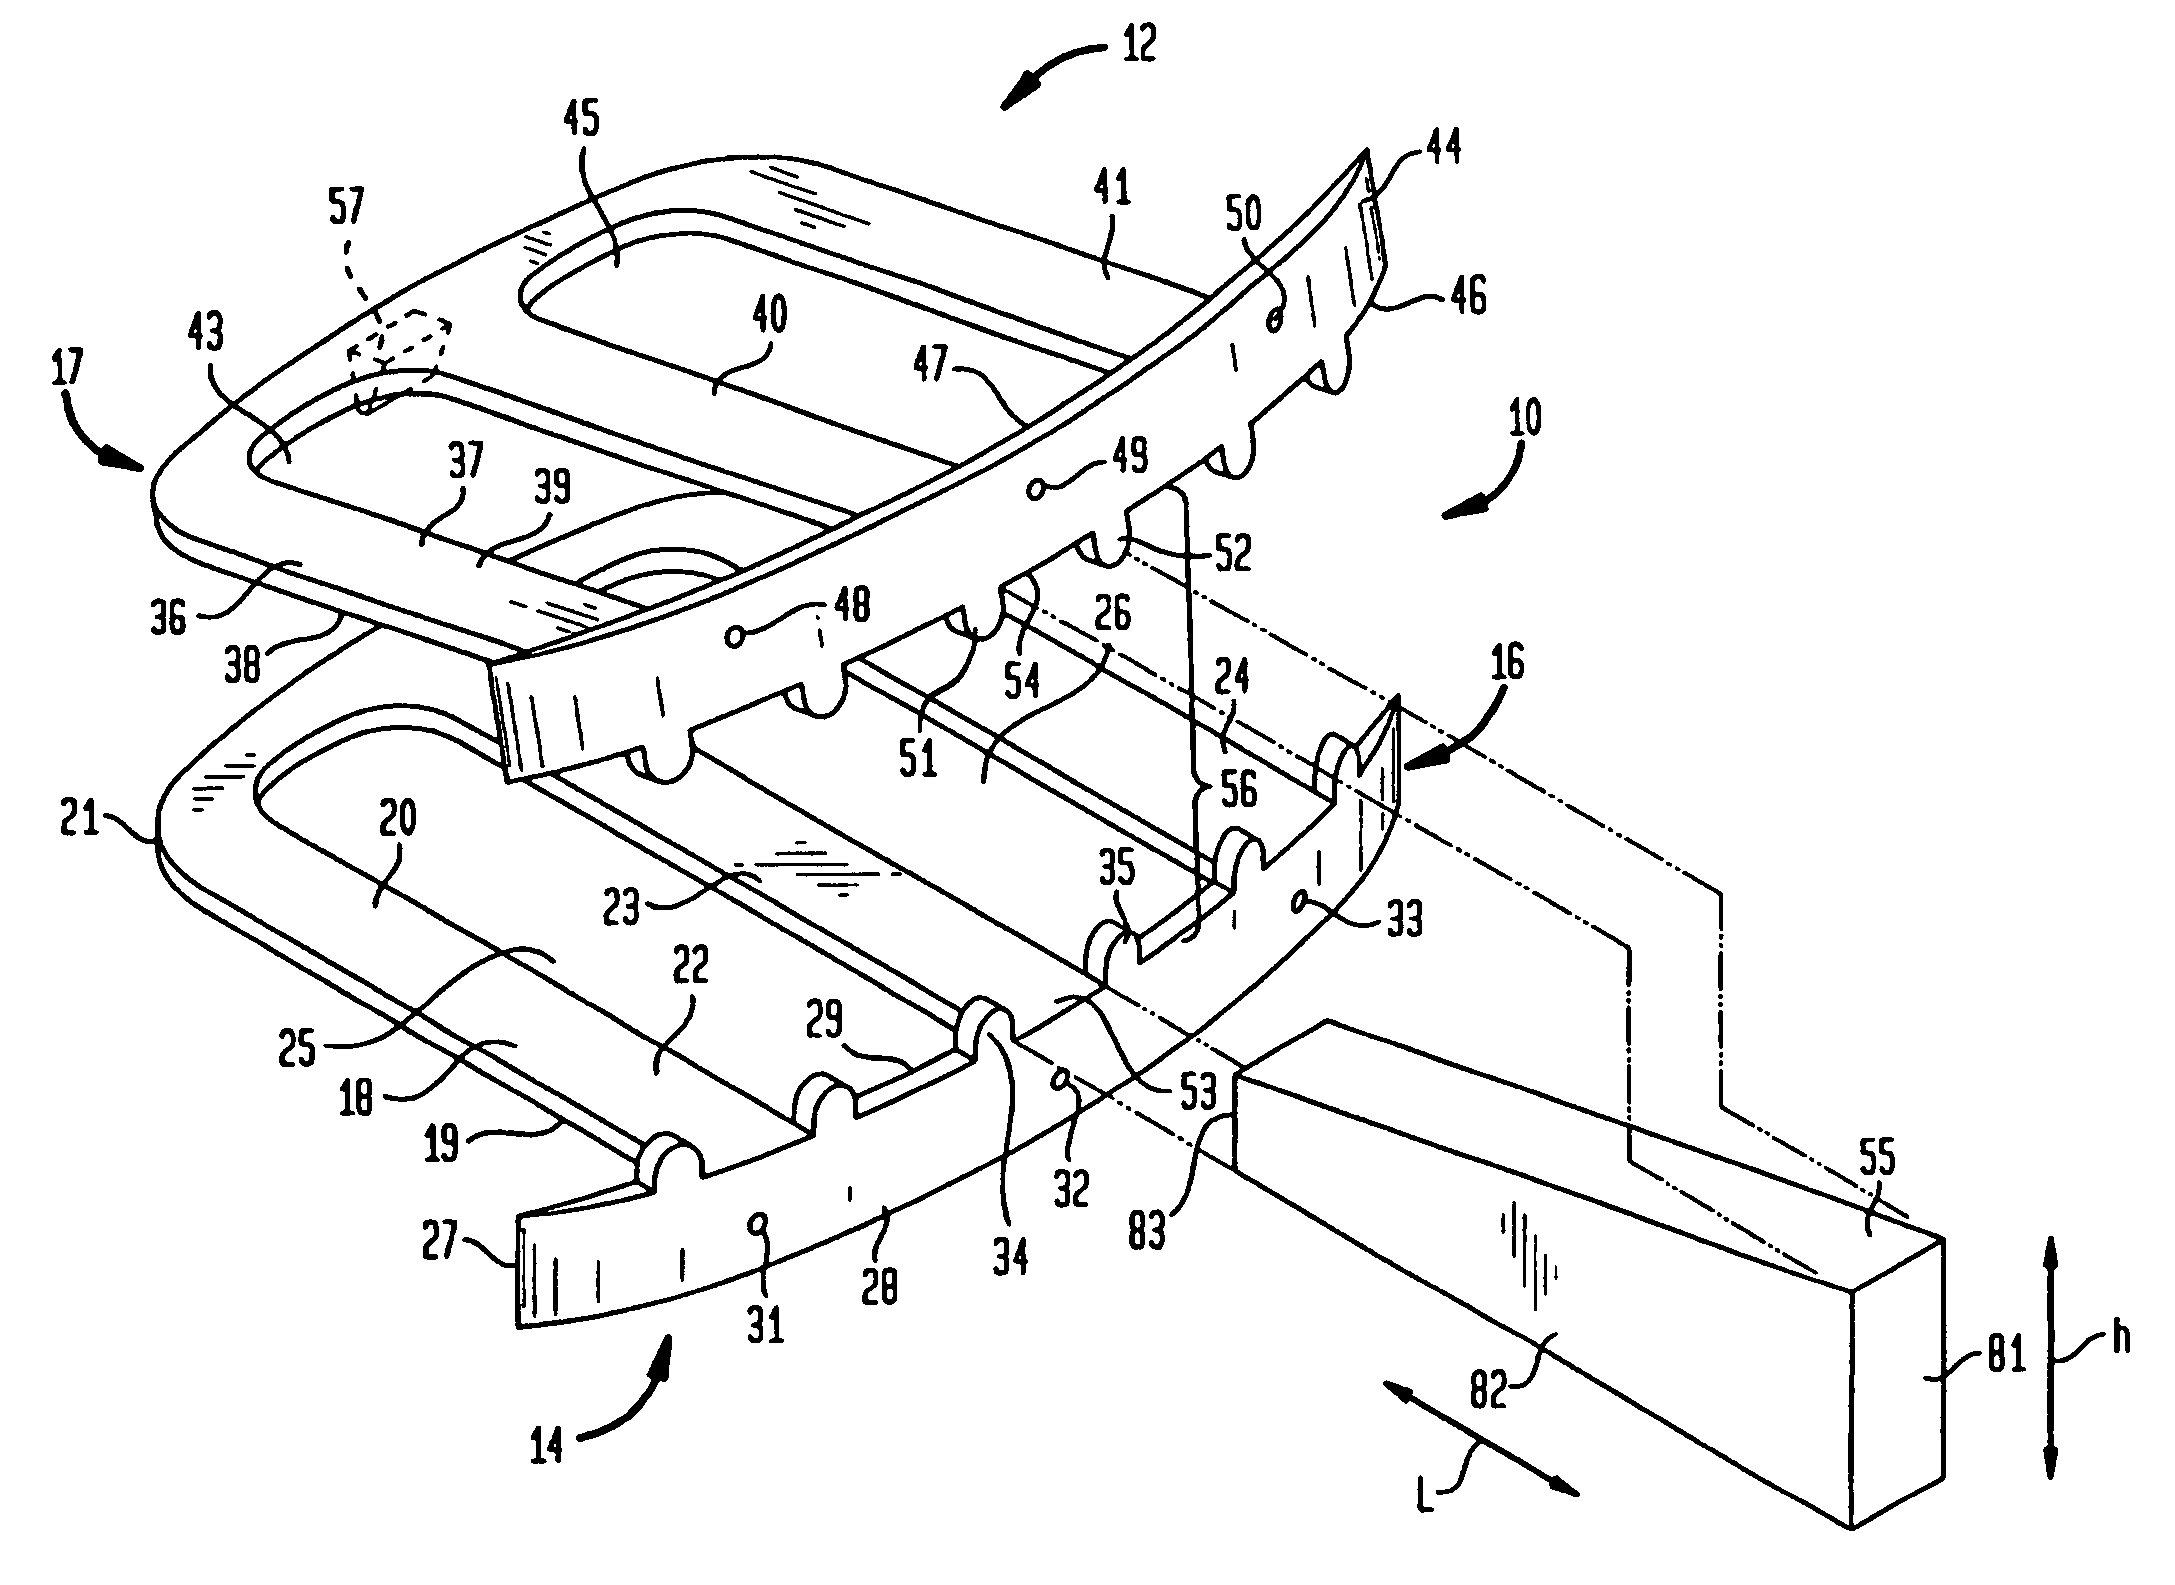 Interbody spinal fusion device